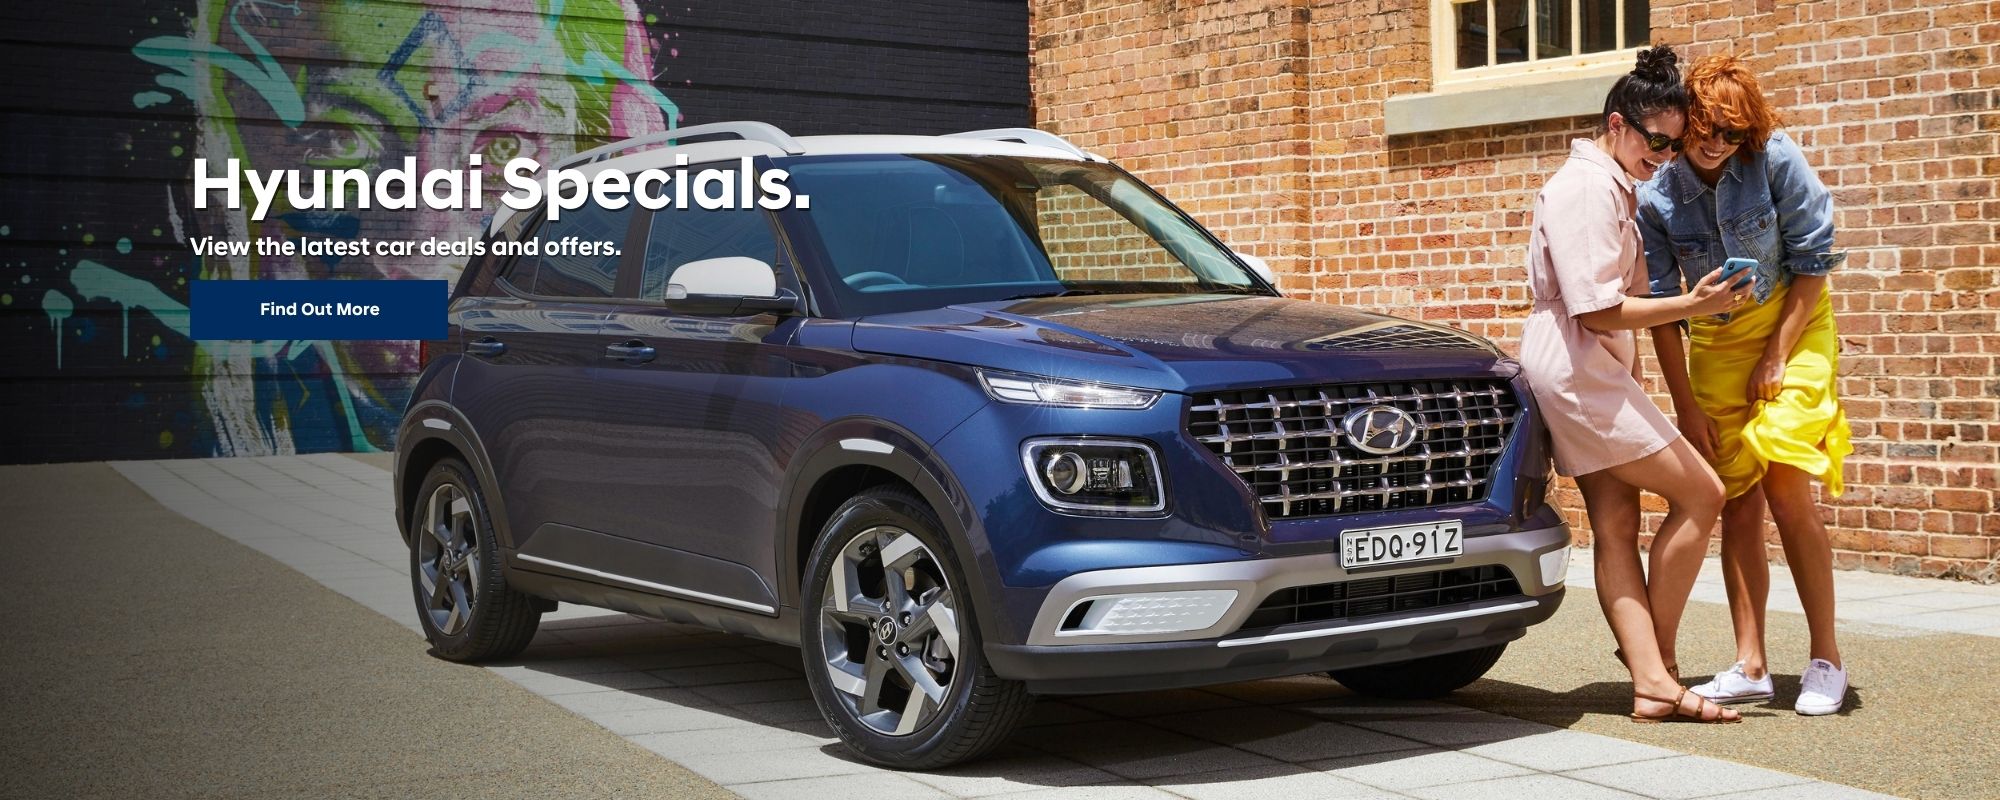 Hyundai Specials. View the latest car deals and offers.